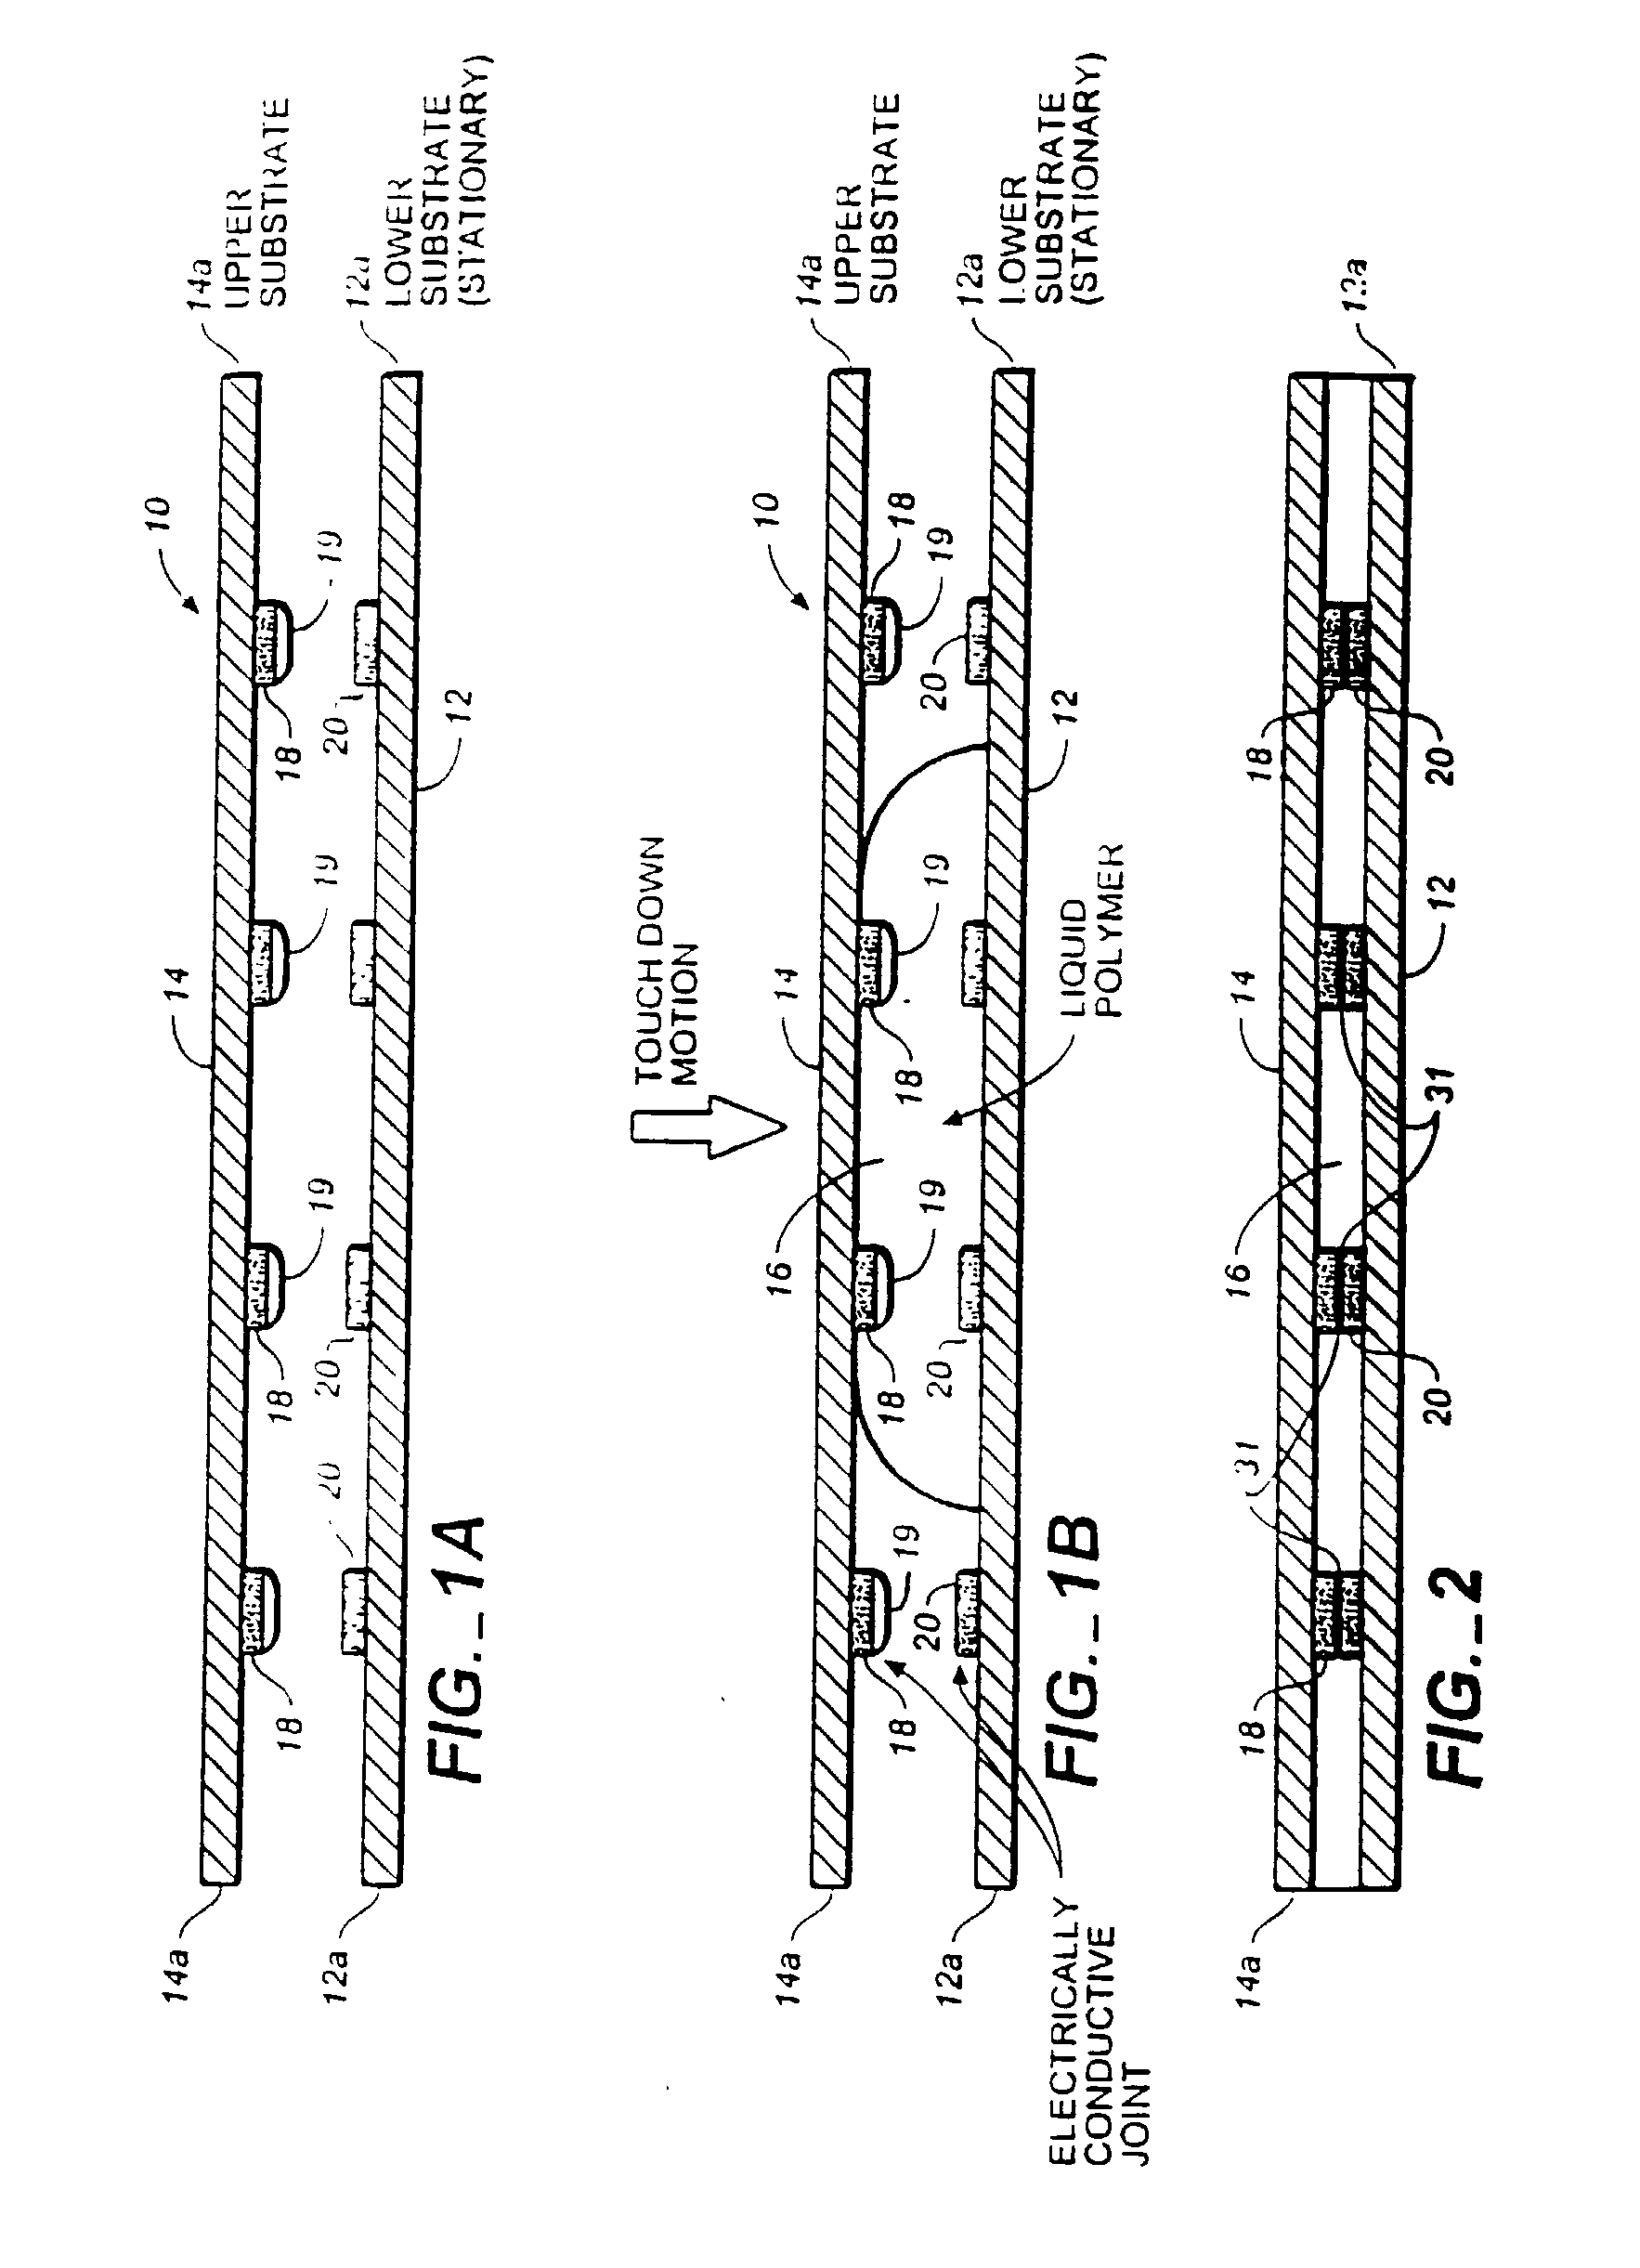 Method for joining conductive structures and an electrical conductive article